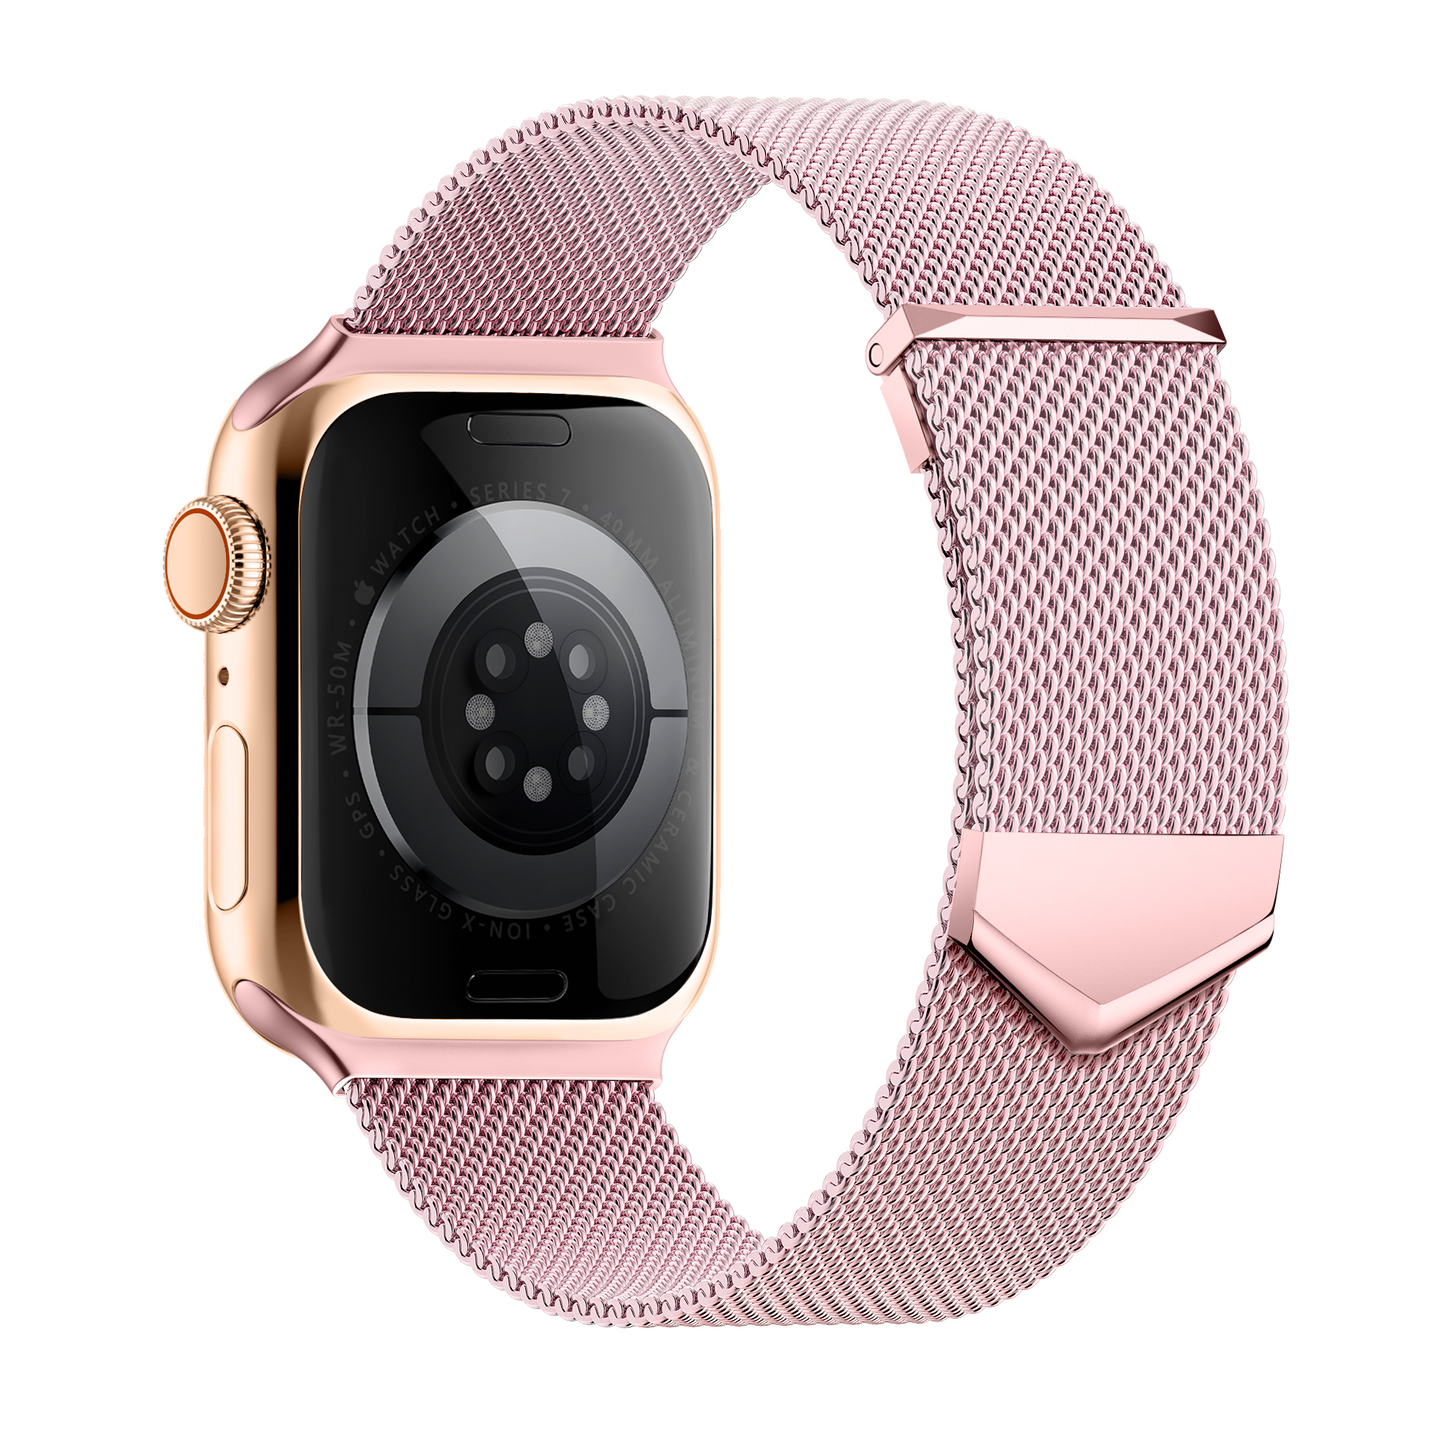 Double Magnet Stainless Steel Bracelet for Apple Watch